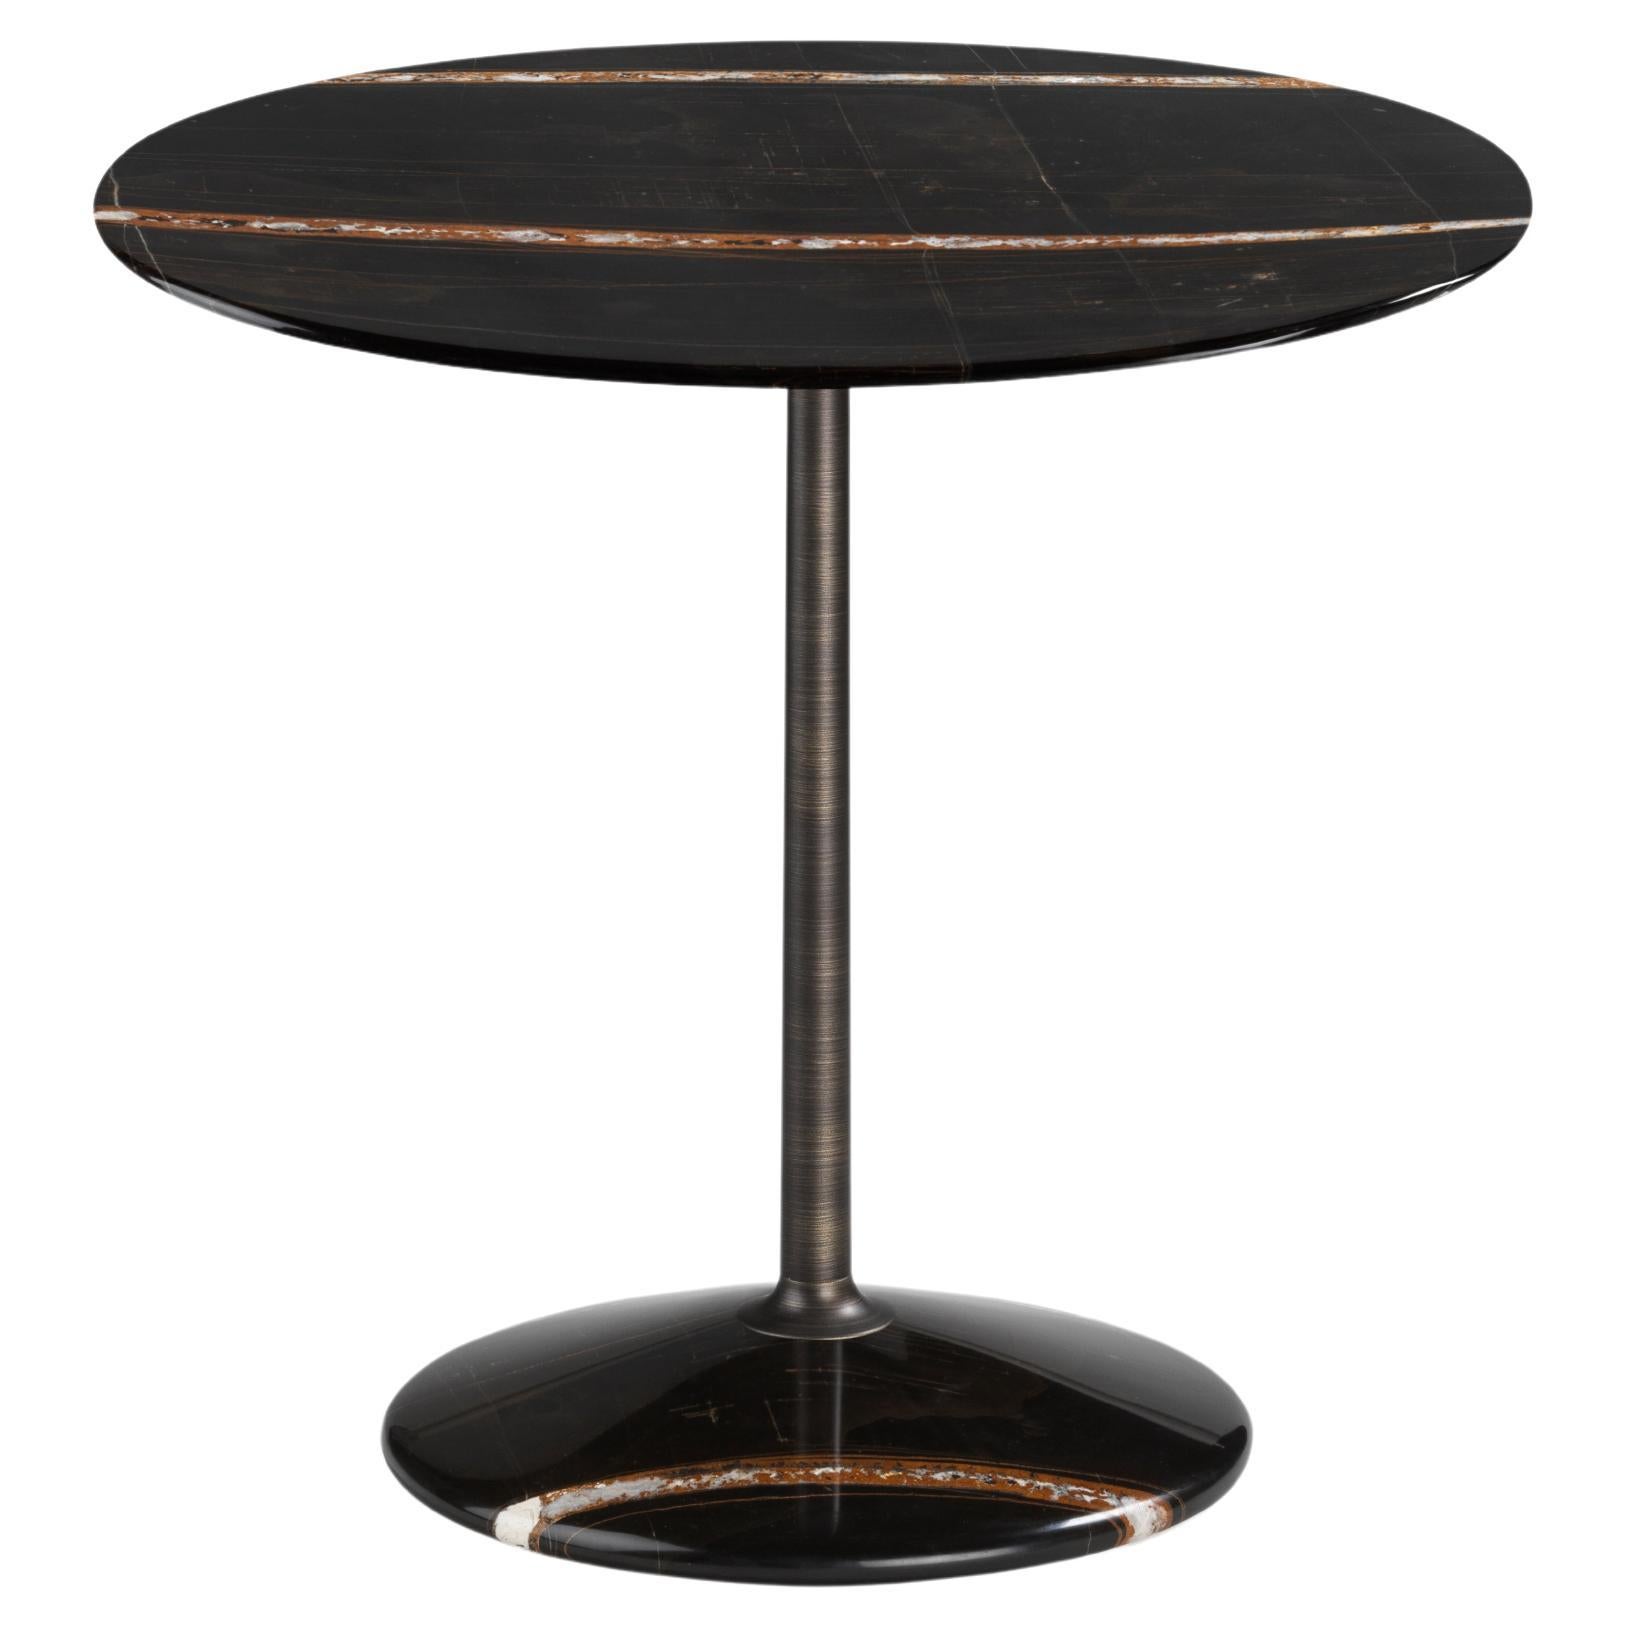 Arnold Short Table, Sahara Noir Top, Burnished Brass Structure, Made in Italy